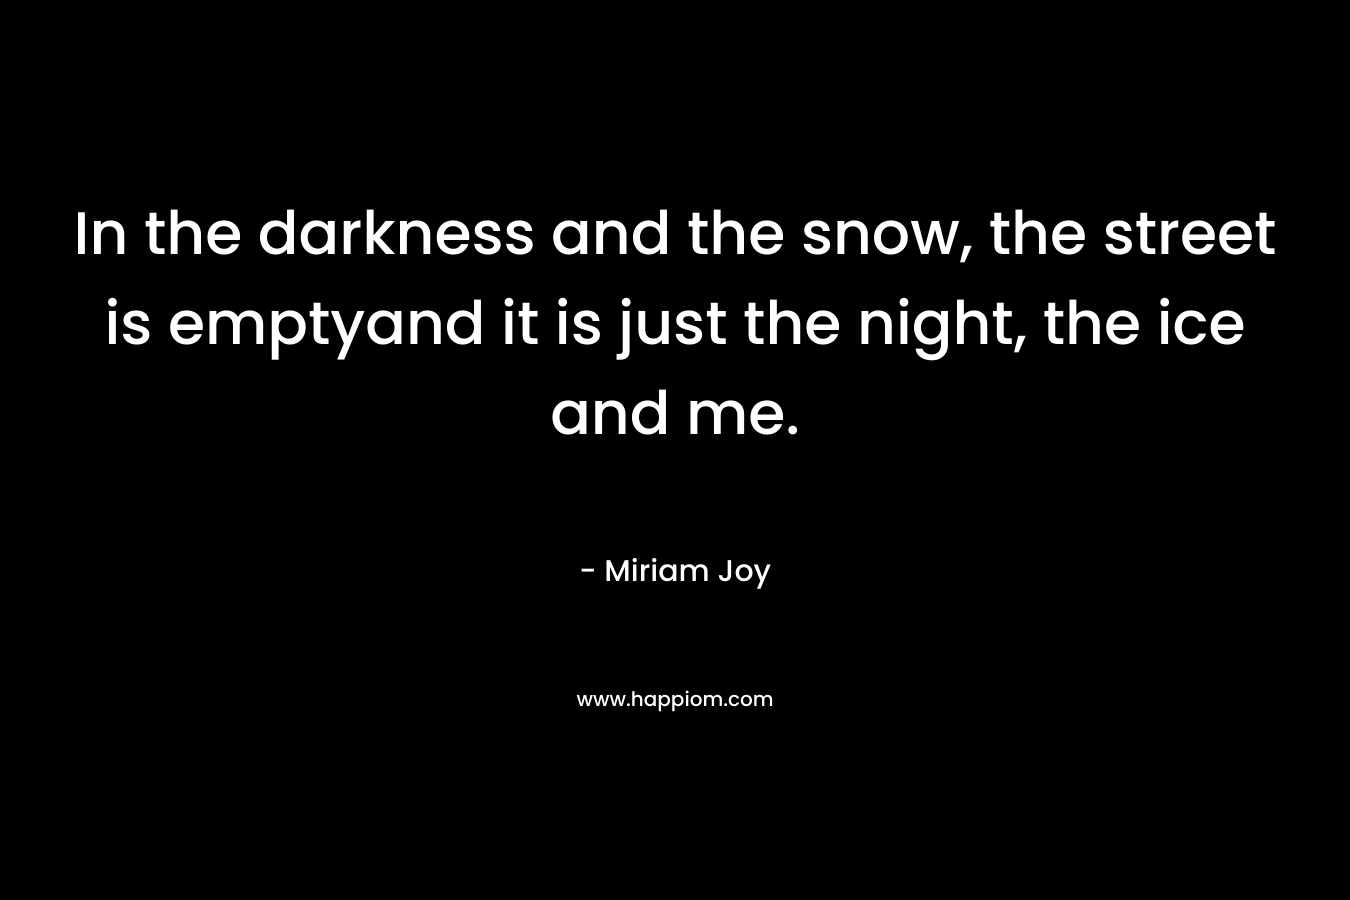 In the darkness and the snow, the street is emptyand it is just the night, the ice and me.